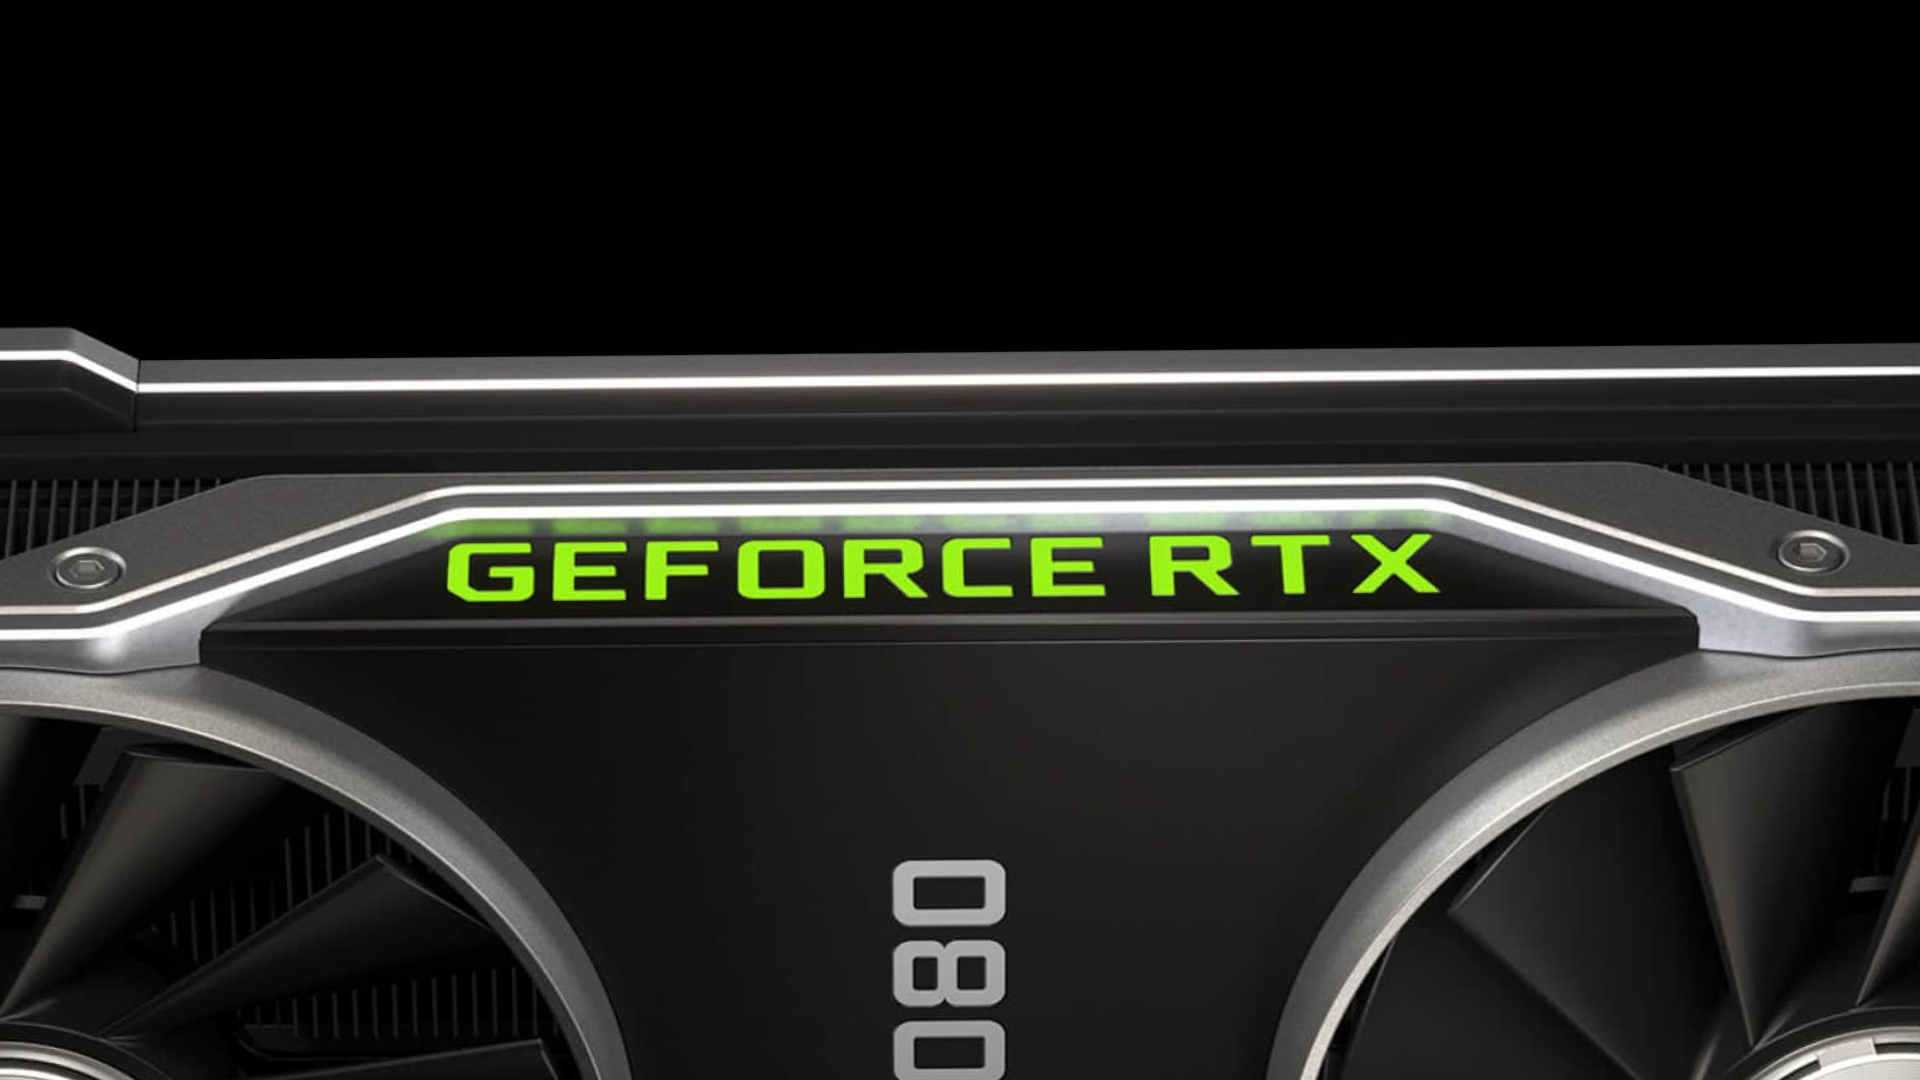 RTX 4000: Close up of Nvidia GeForce GPU logo with green text